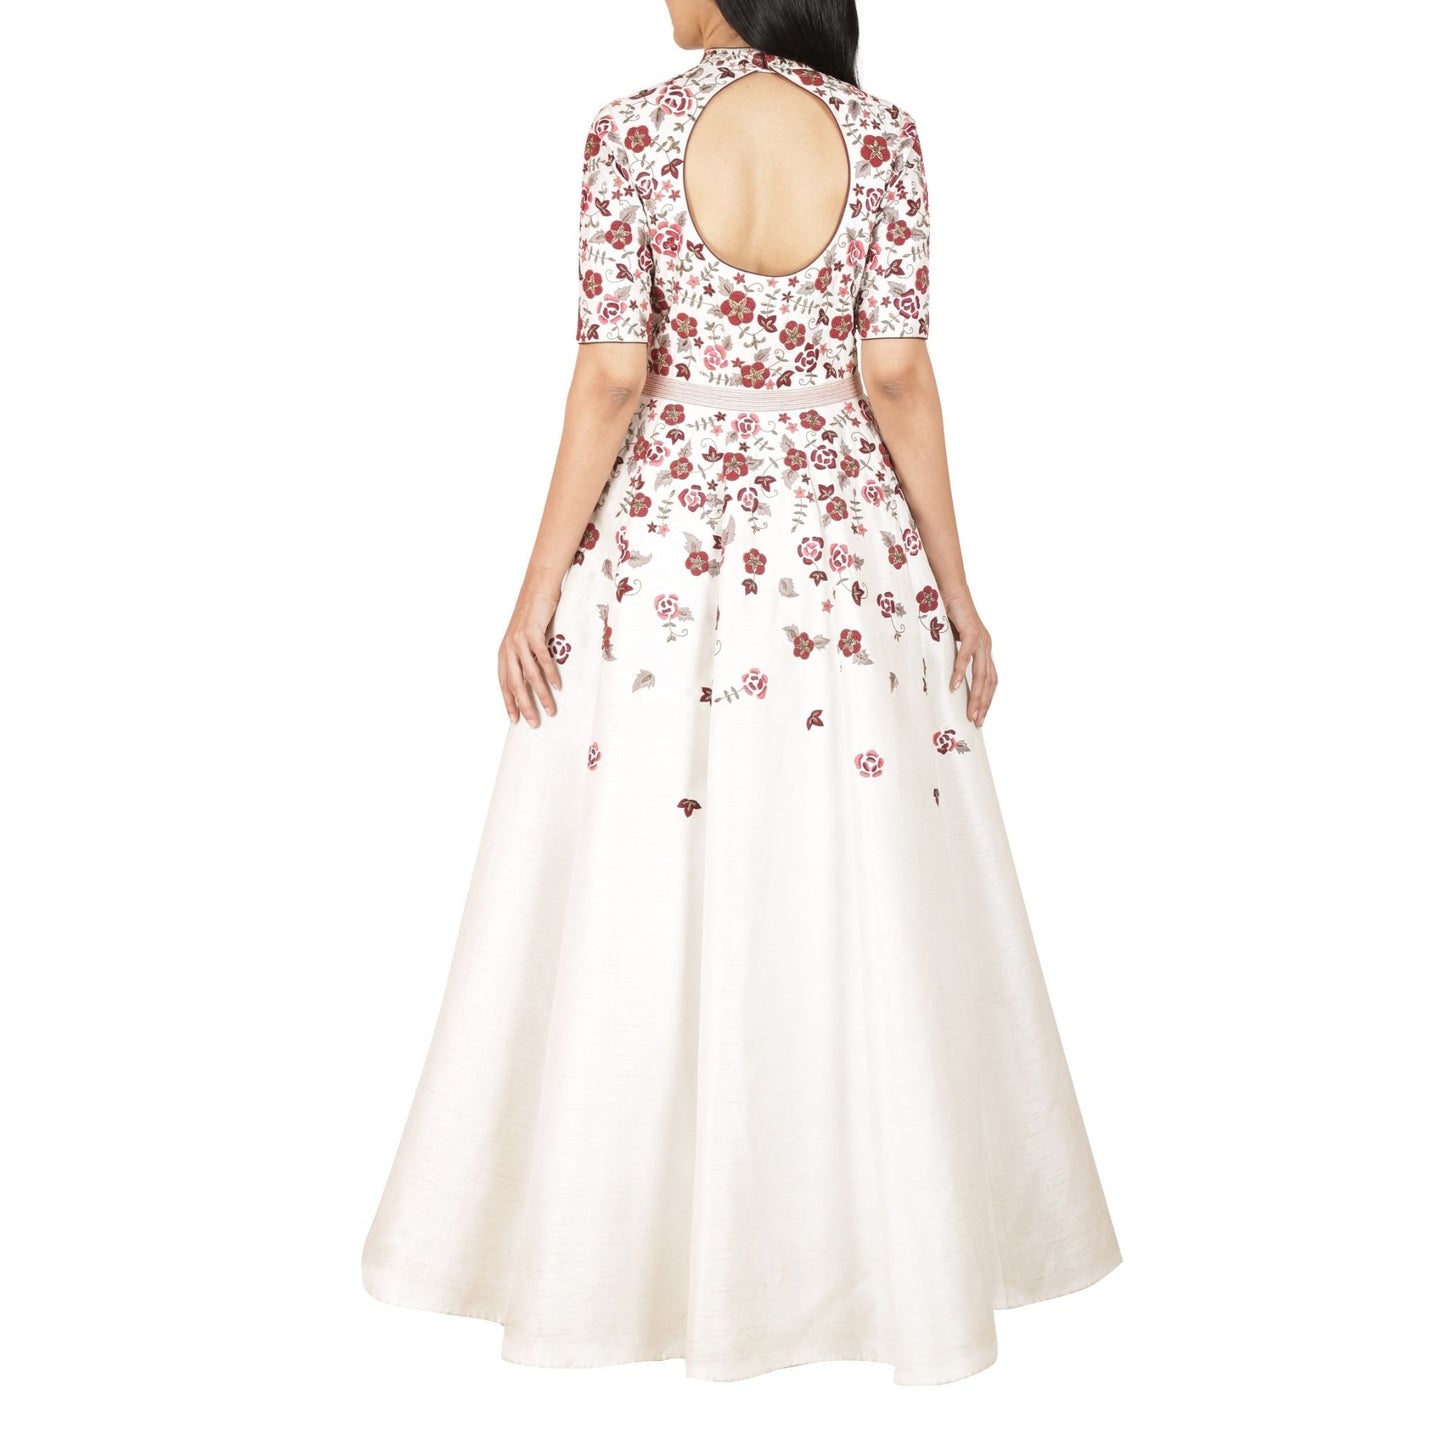 Full length dress with floral and zardozi embroidery